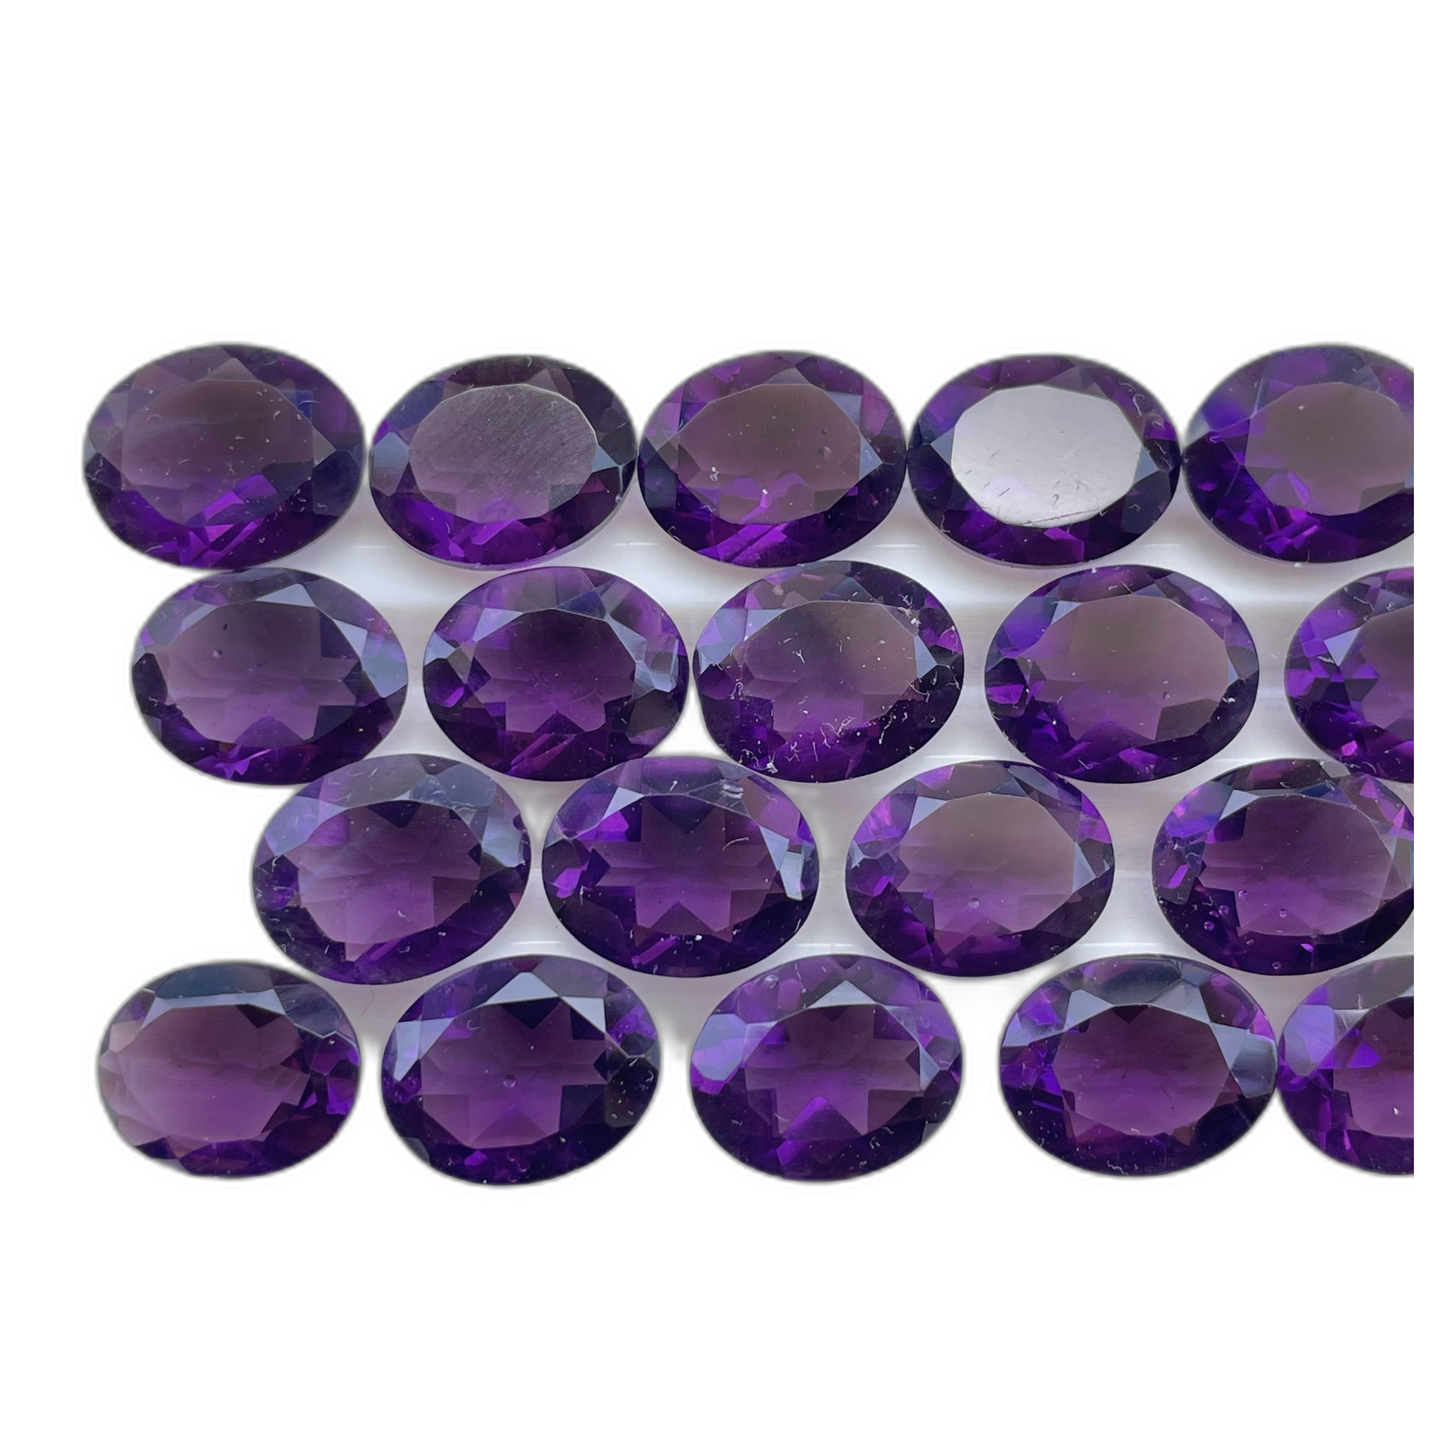 Purple Amethyst Faceted Nice Quality (8-10 mm) Oval Shape (Natural)